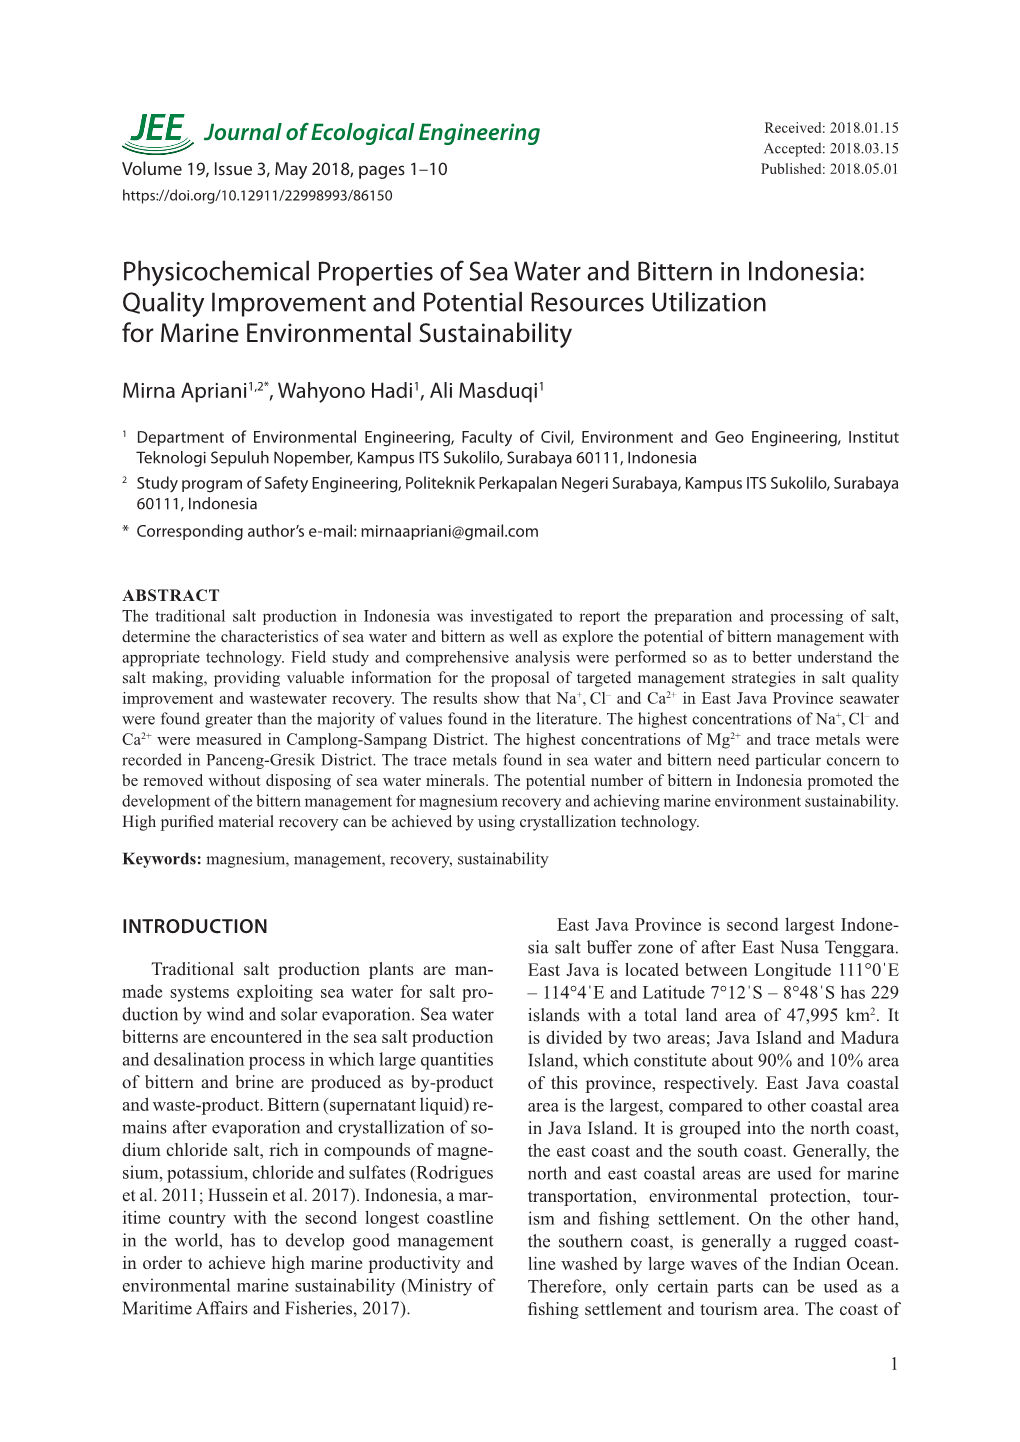 Physicochemical Properties of Sea Water and Bittern in Indonesia: Quality Improvement and Potential Resources Utilization for Marine Environmental Sustainability